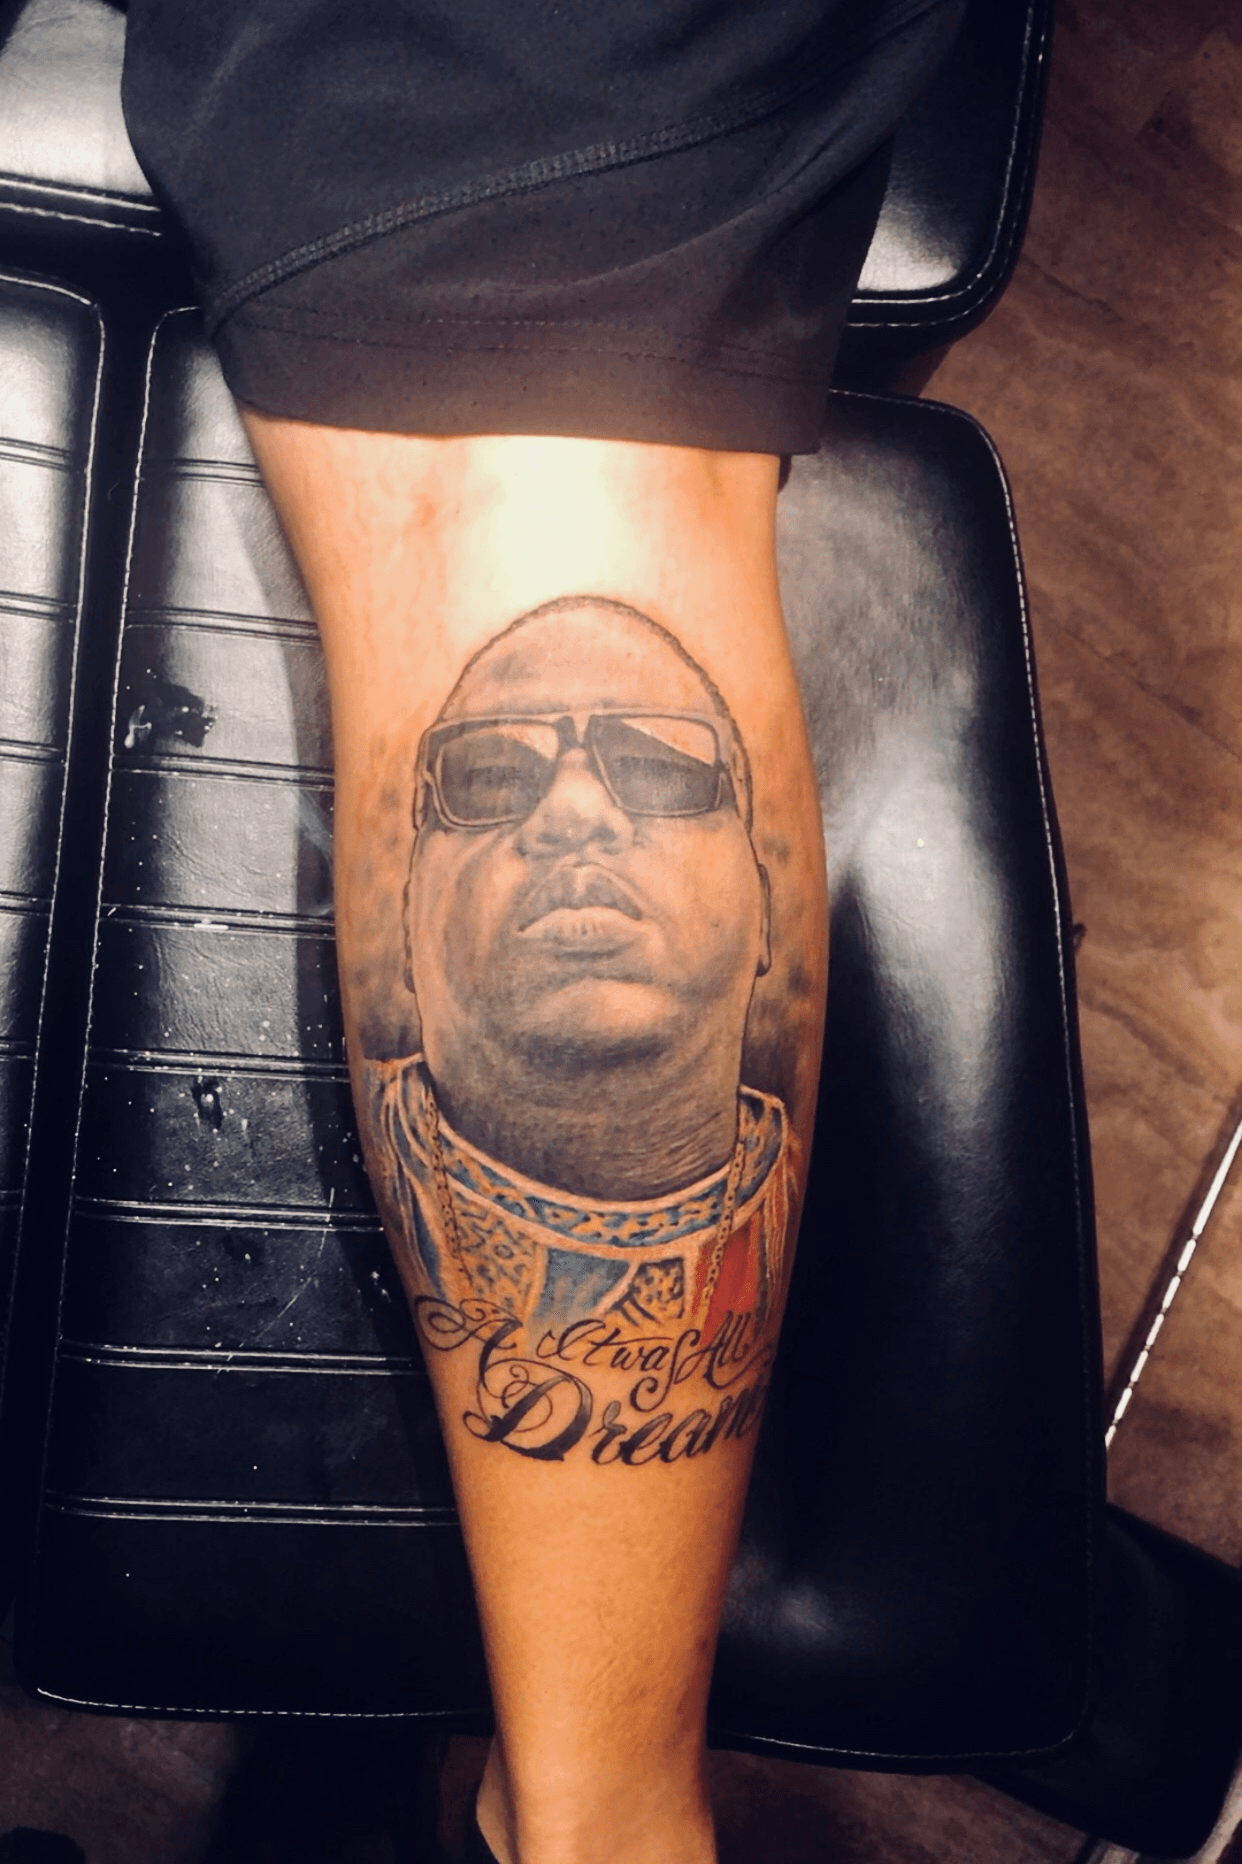 My dog but as Biggie Smalls by Bex Lowe  Minerva Lodge Tattoo Club  Chester England  rtattoos